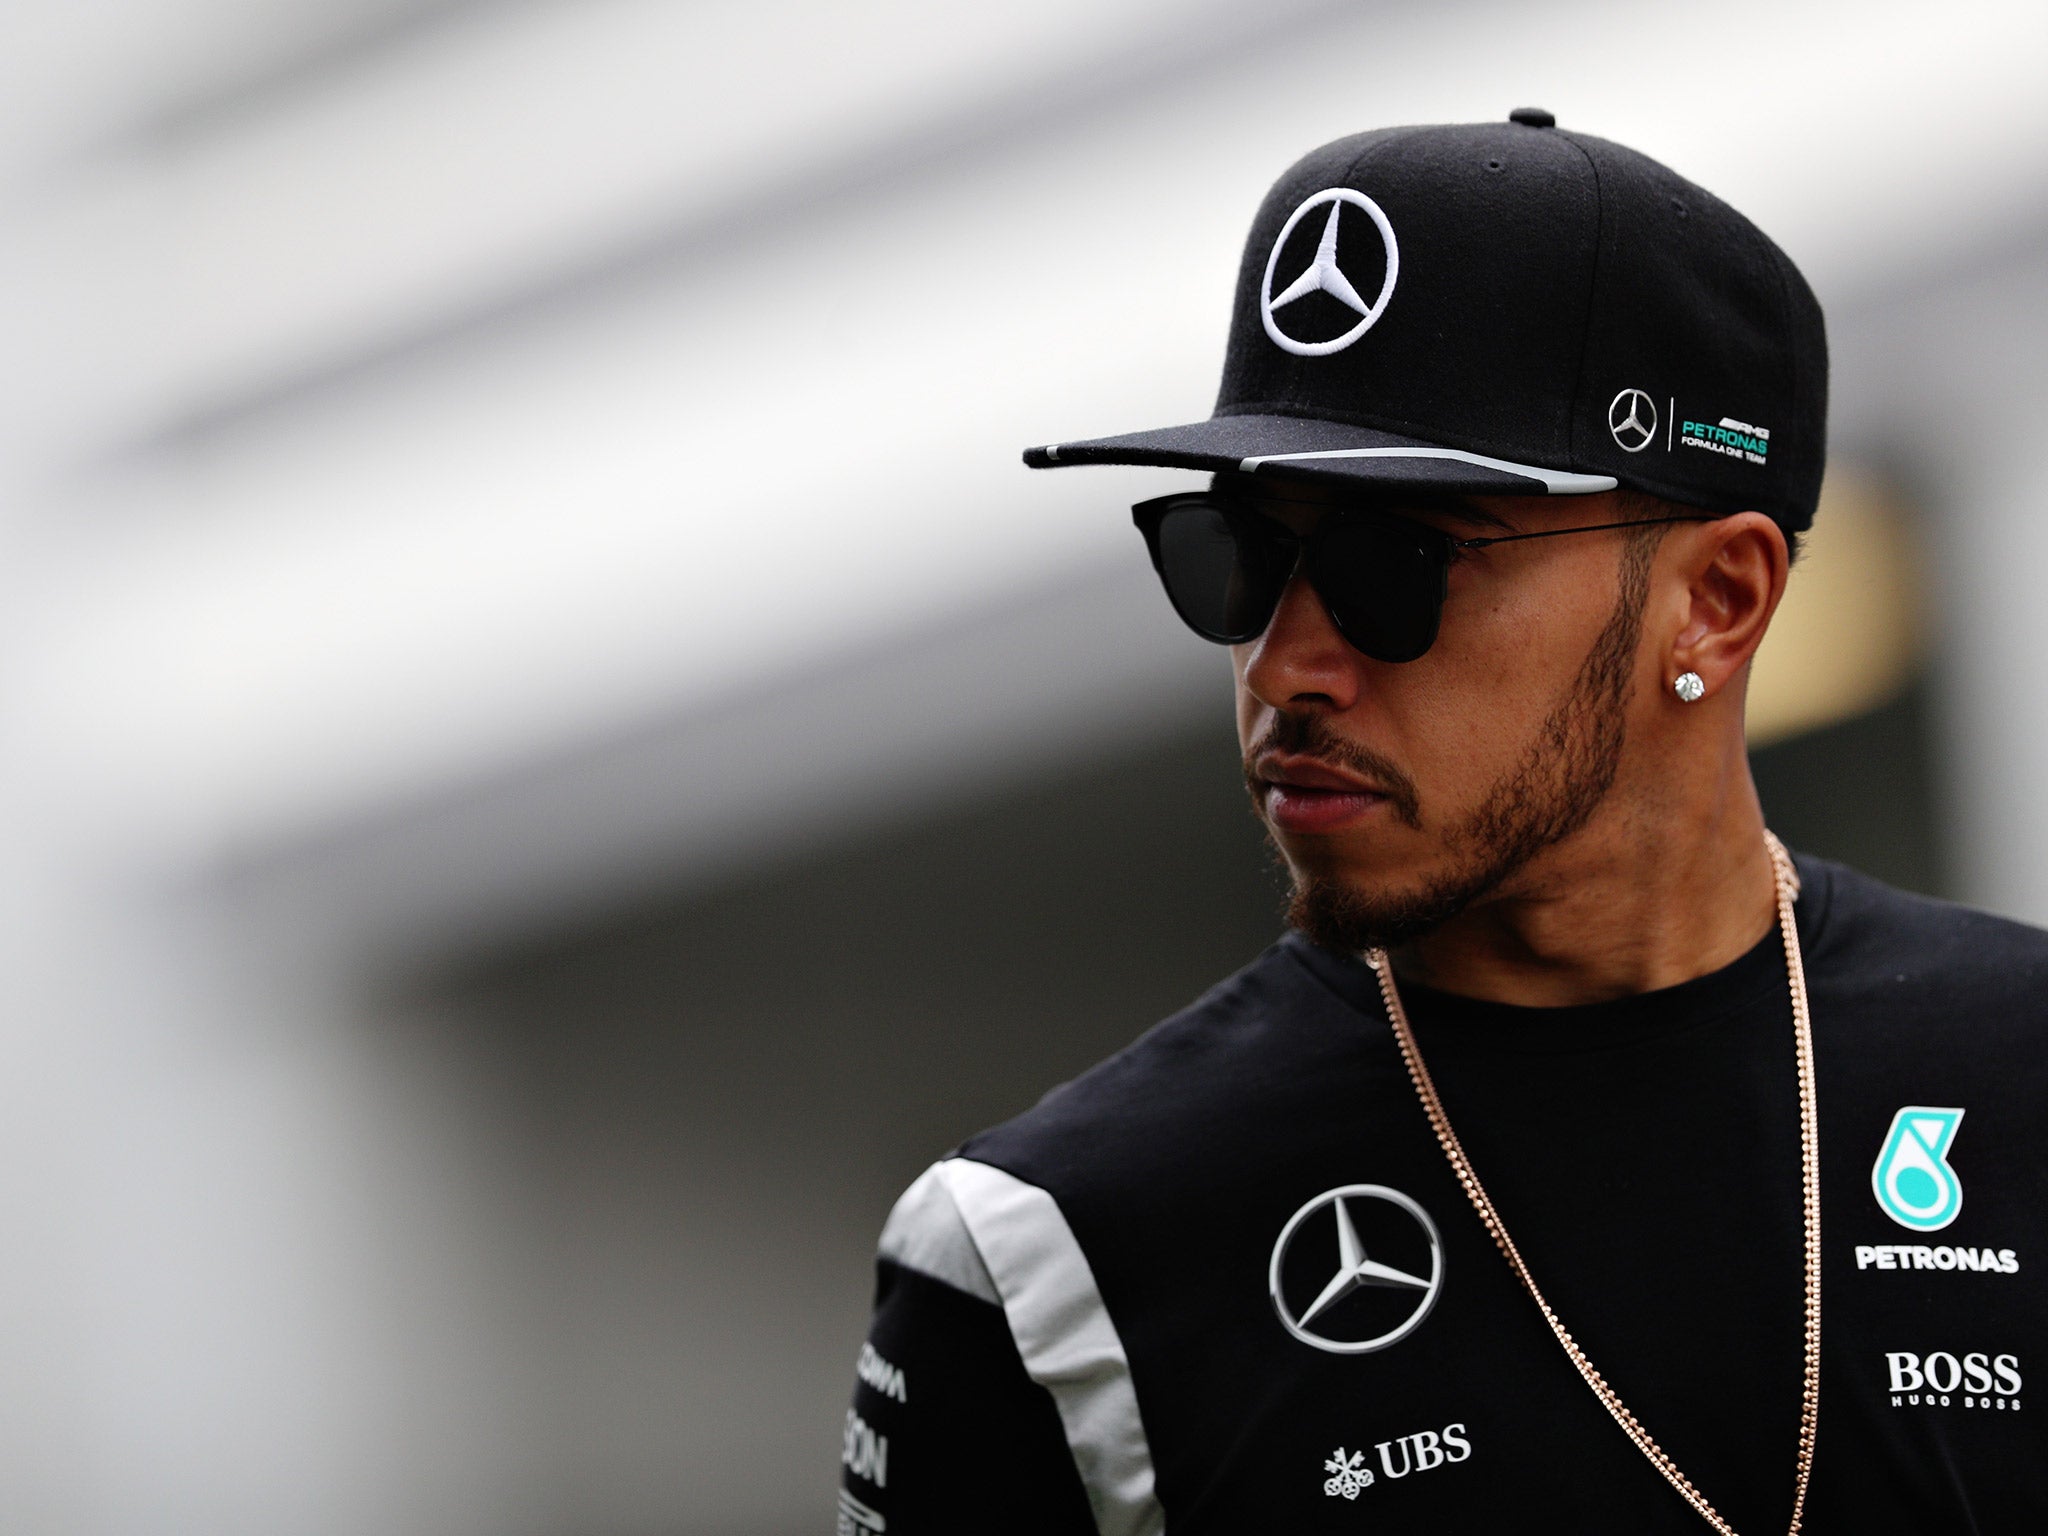 Lewis Hamilton was fastest in practice for the Russian Grand Prix